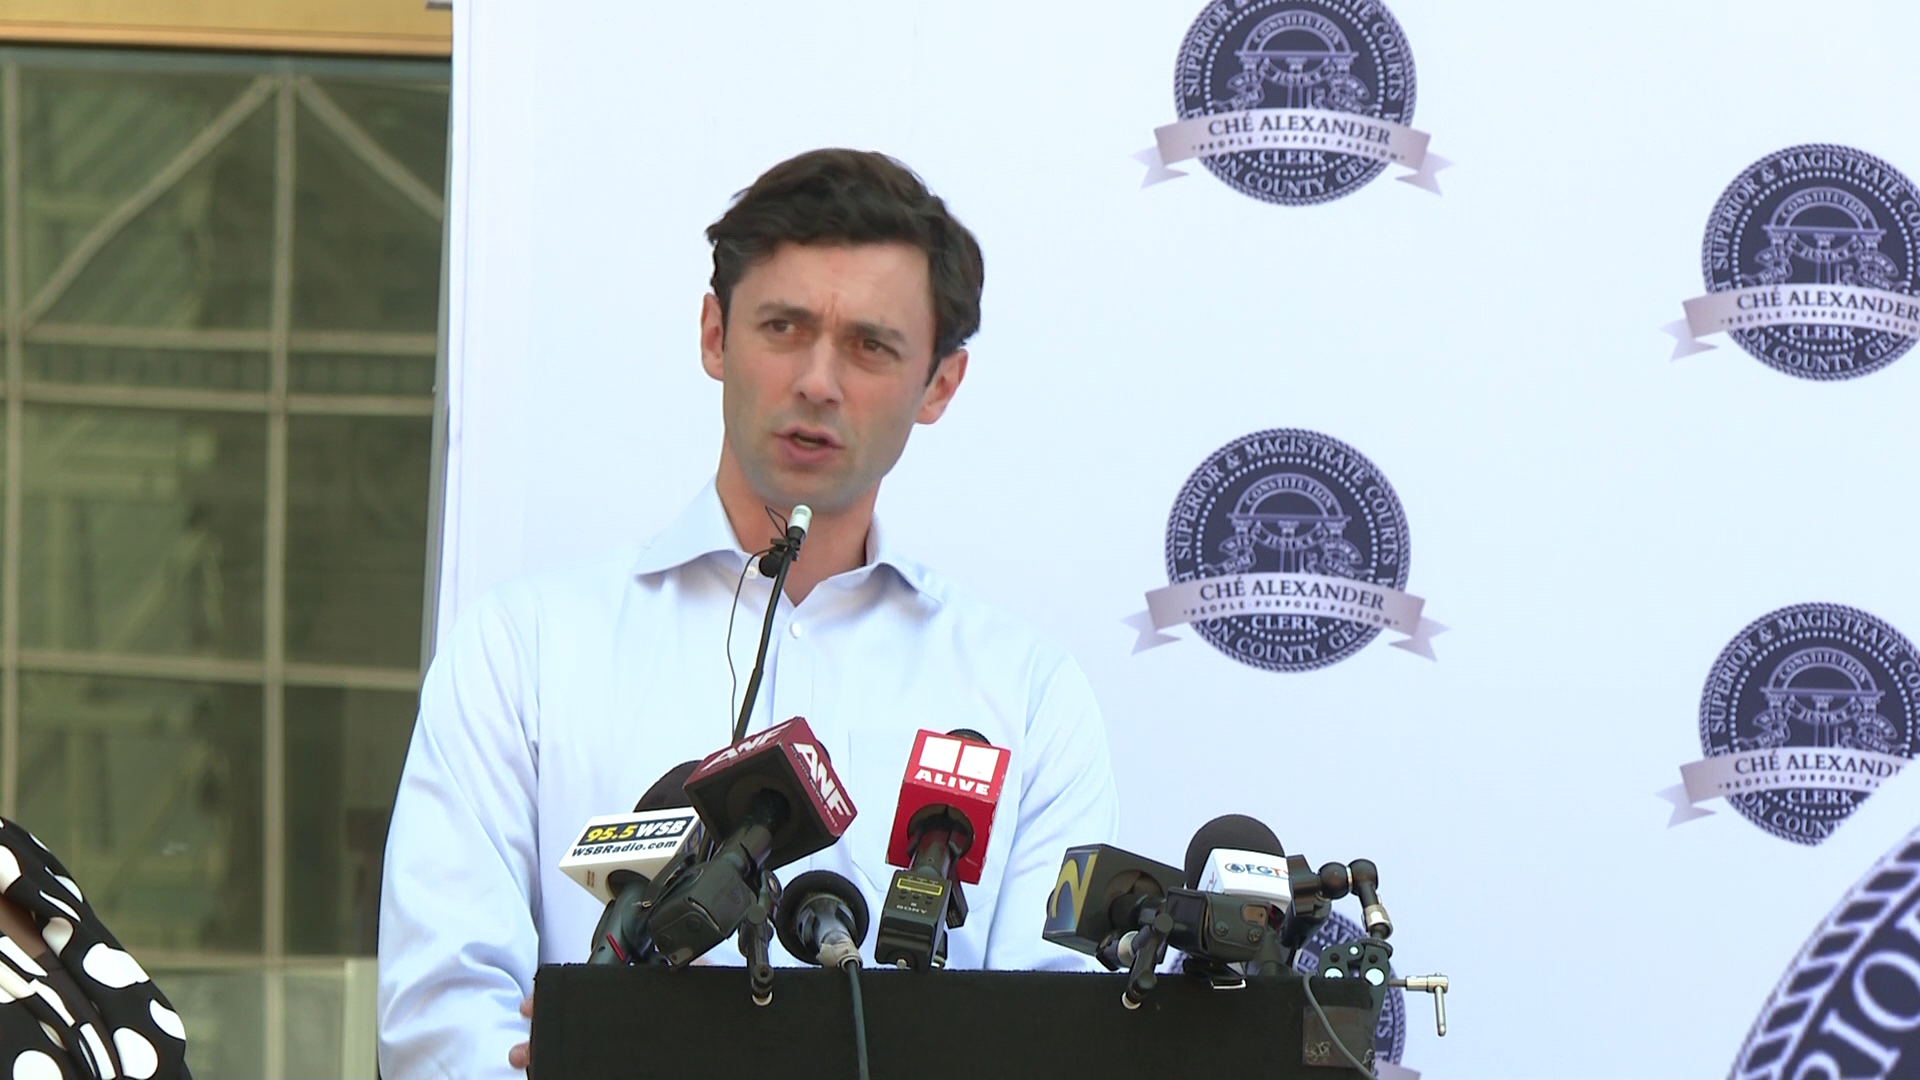 Sen. Ossoff held a news conference on Tuesday and addressed the issues in a letter to Inspector General Tammy Hull.